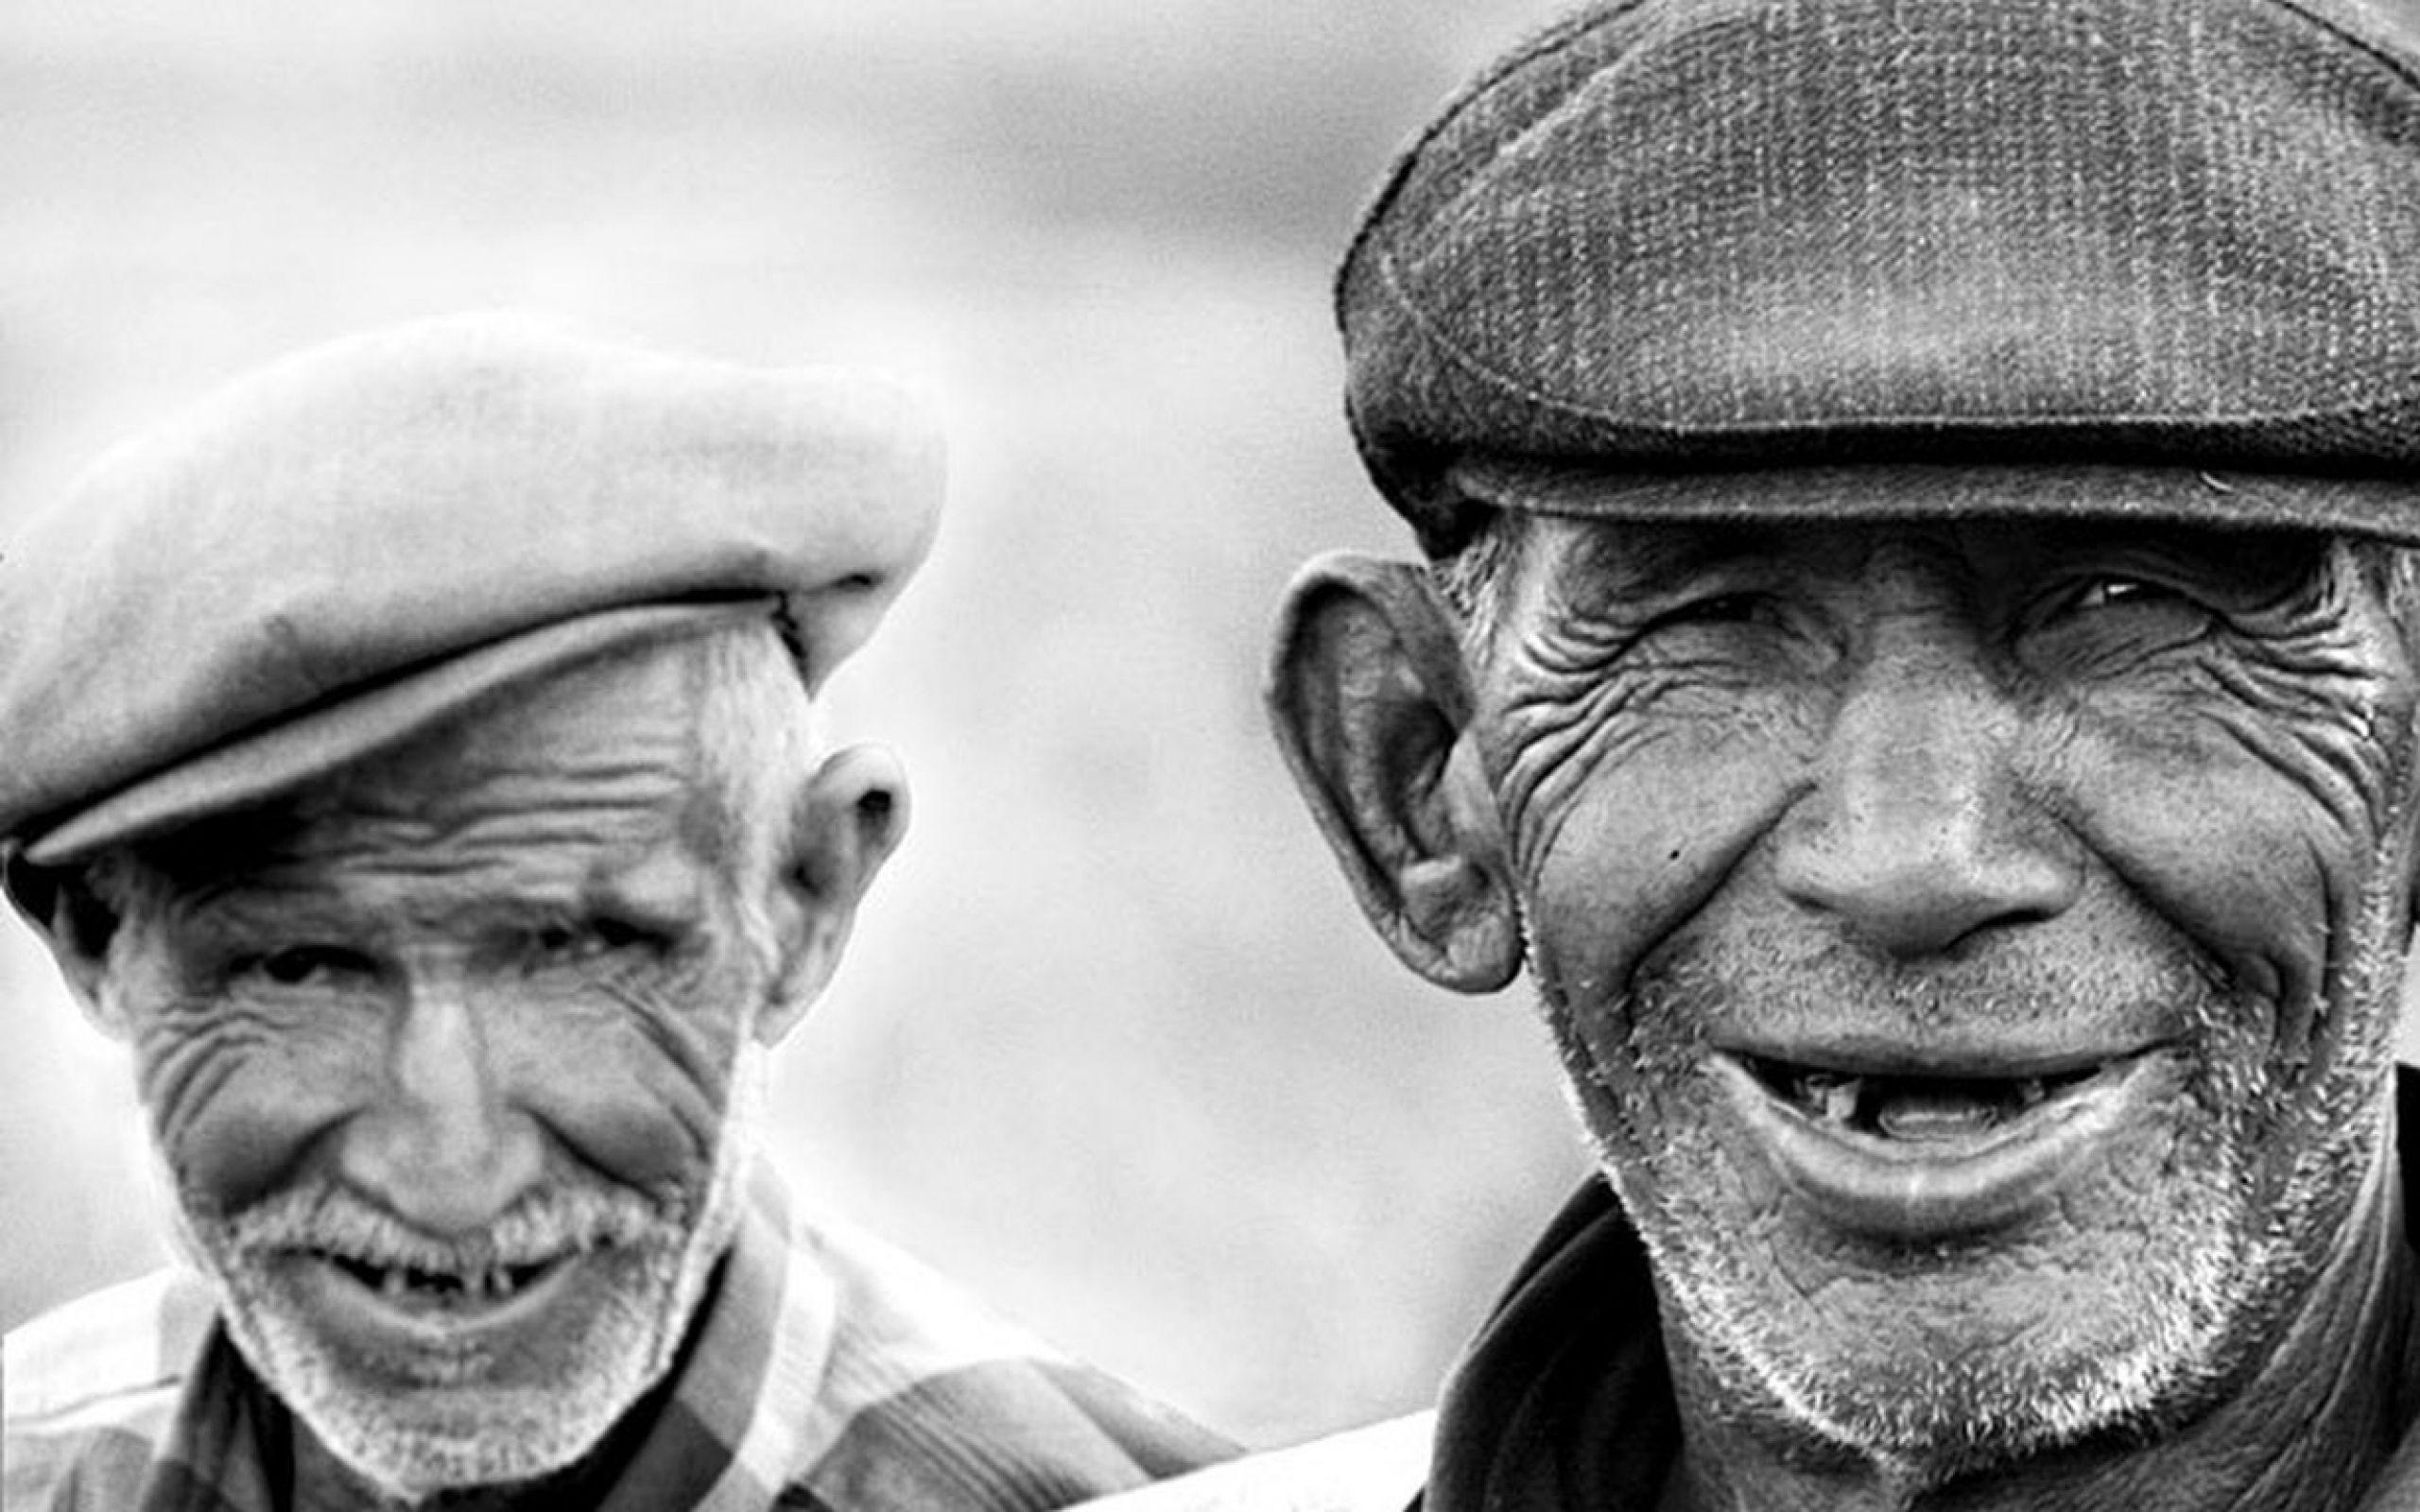 Download Wallpaper, Download 2560x1600 black and white old people